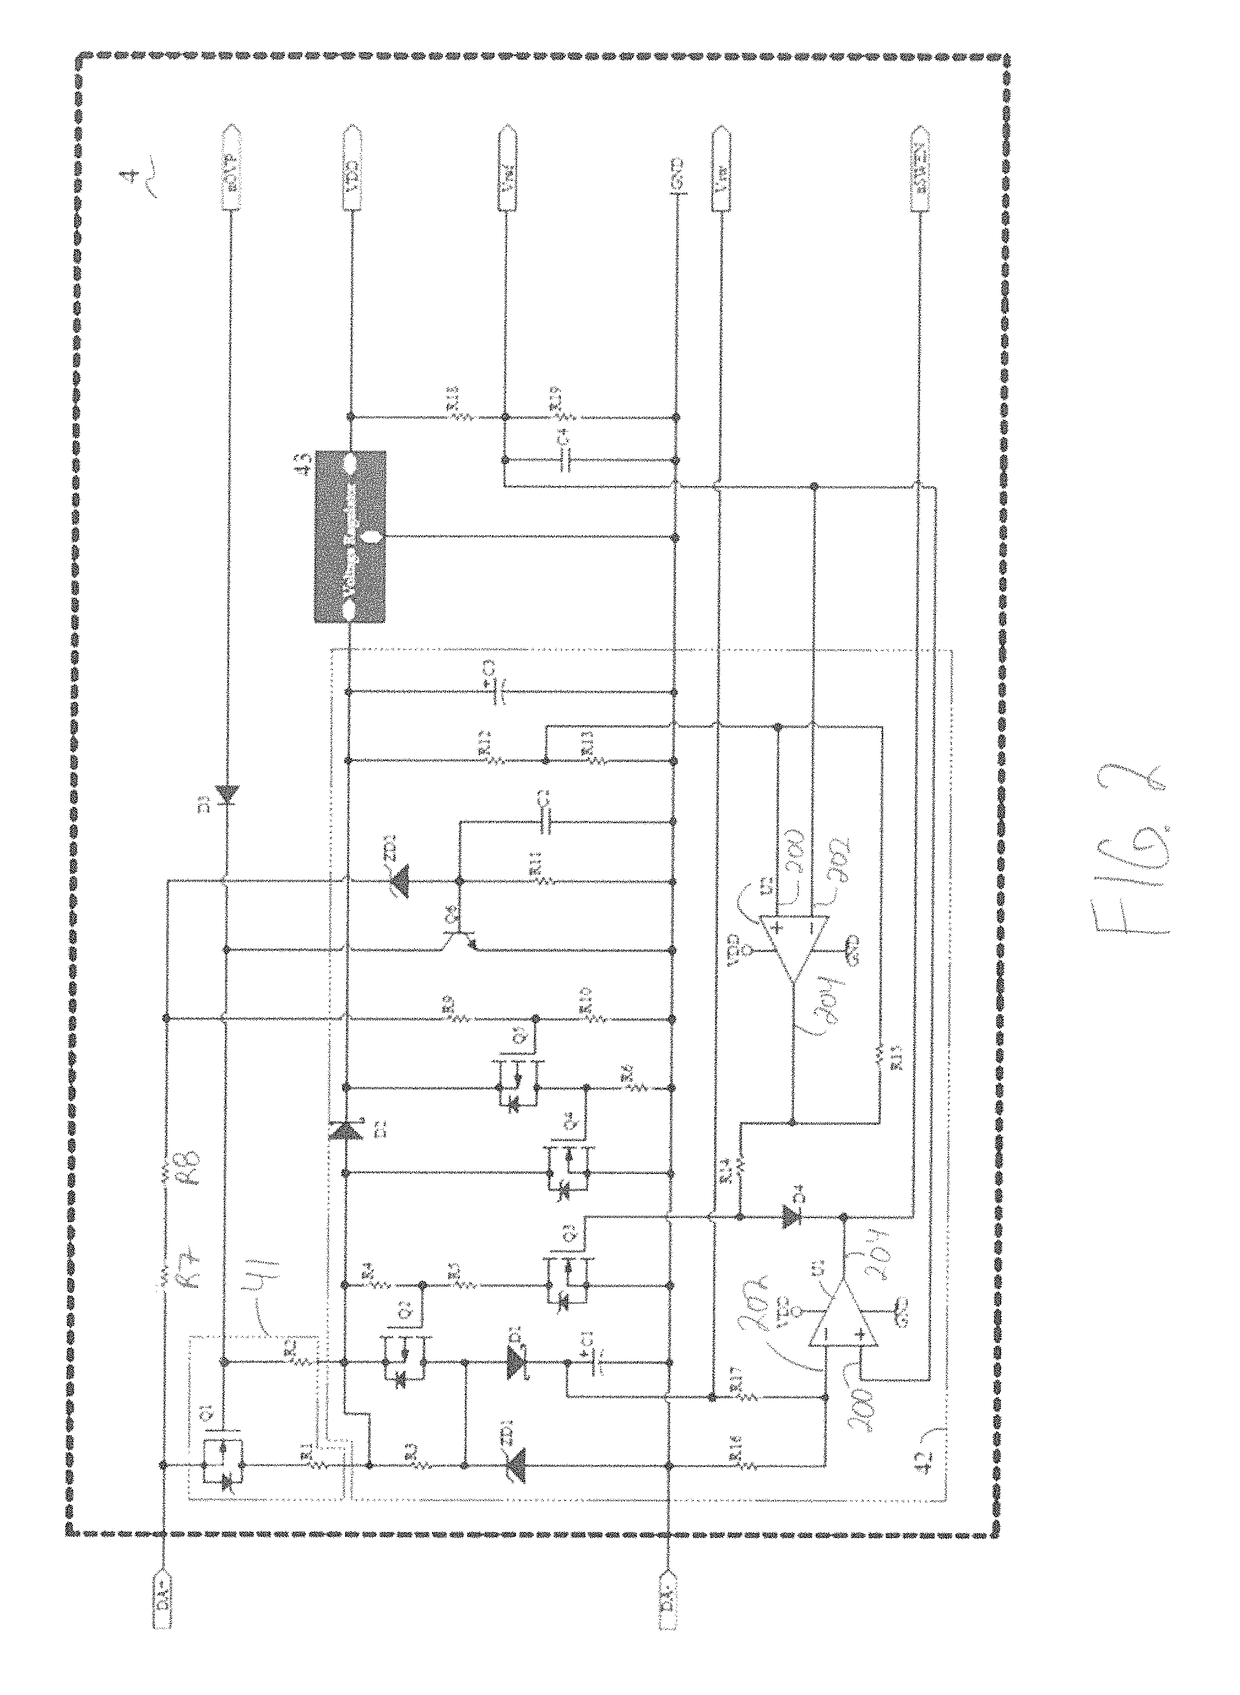 Power handling system and method